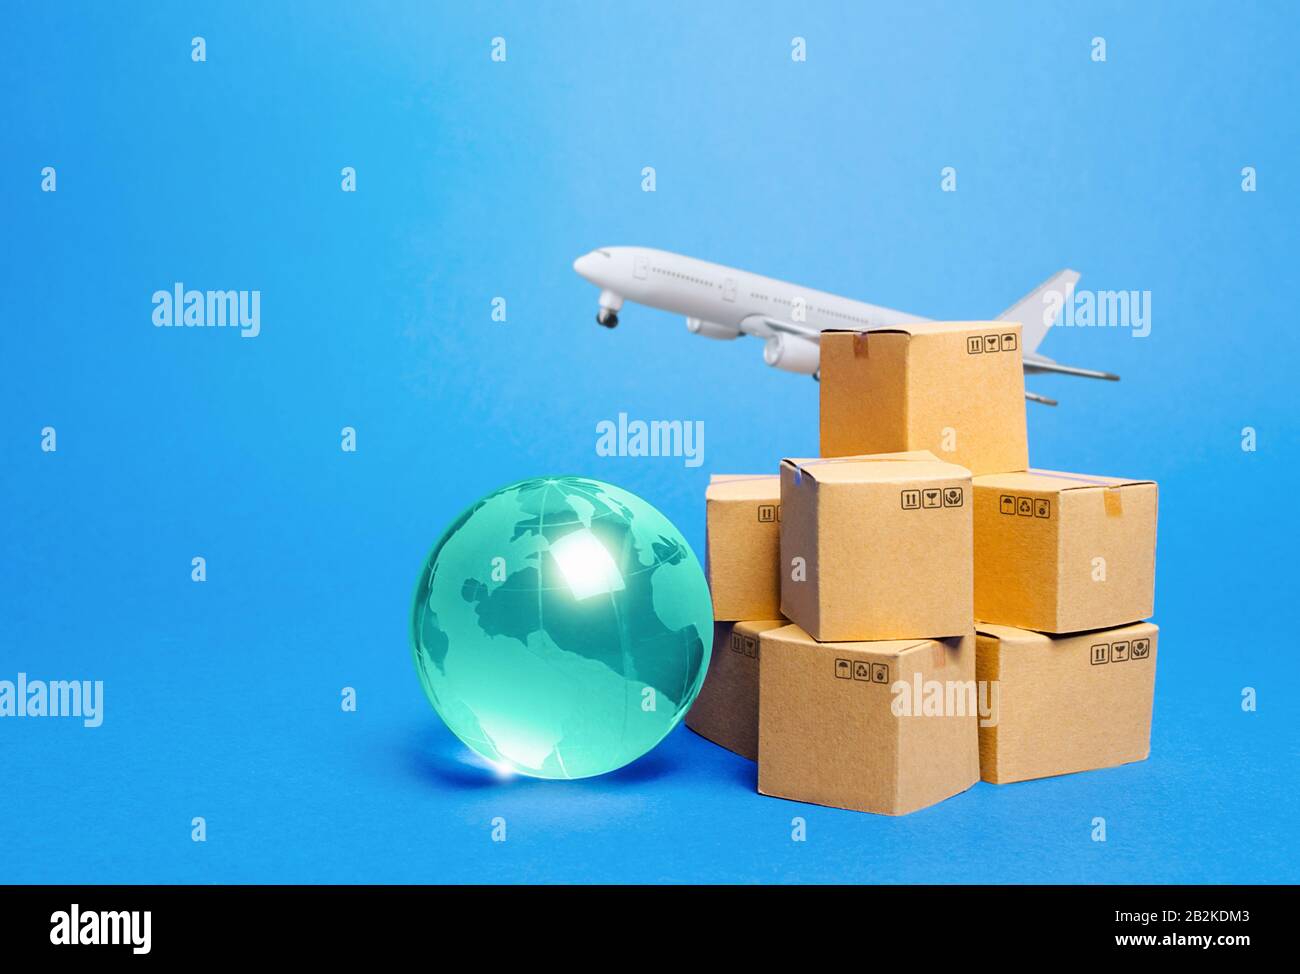 Blue globe, cardboard boxes and freight airplane. International world trade. Deliver goods, shipping. Import export freight traffic. Markets globaliza Stock Photo